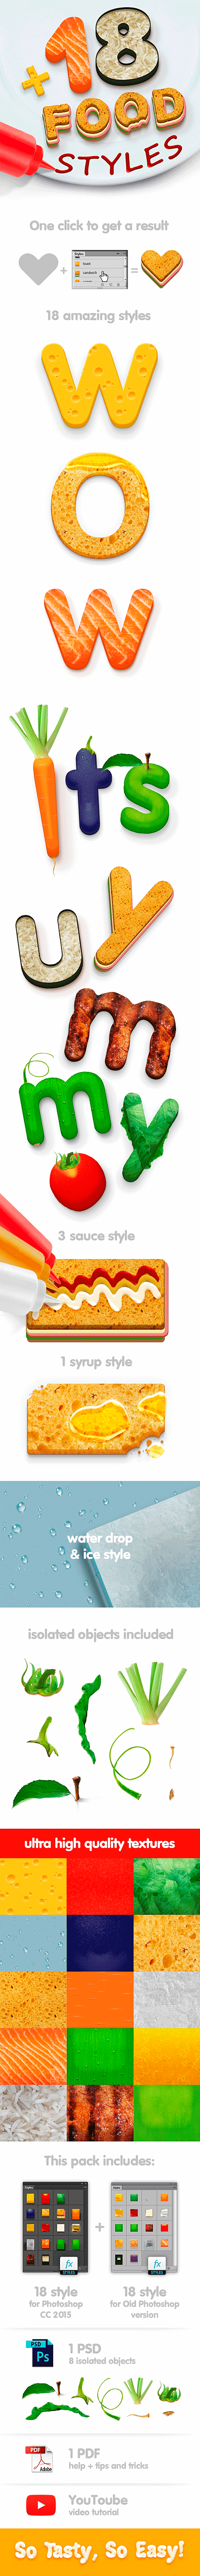 GraphicRiver - 18 Food Styles